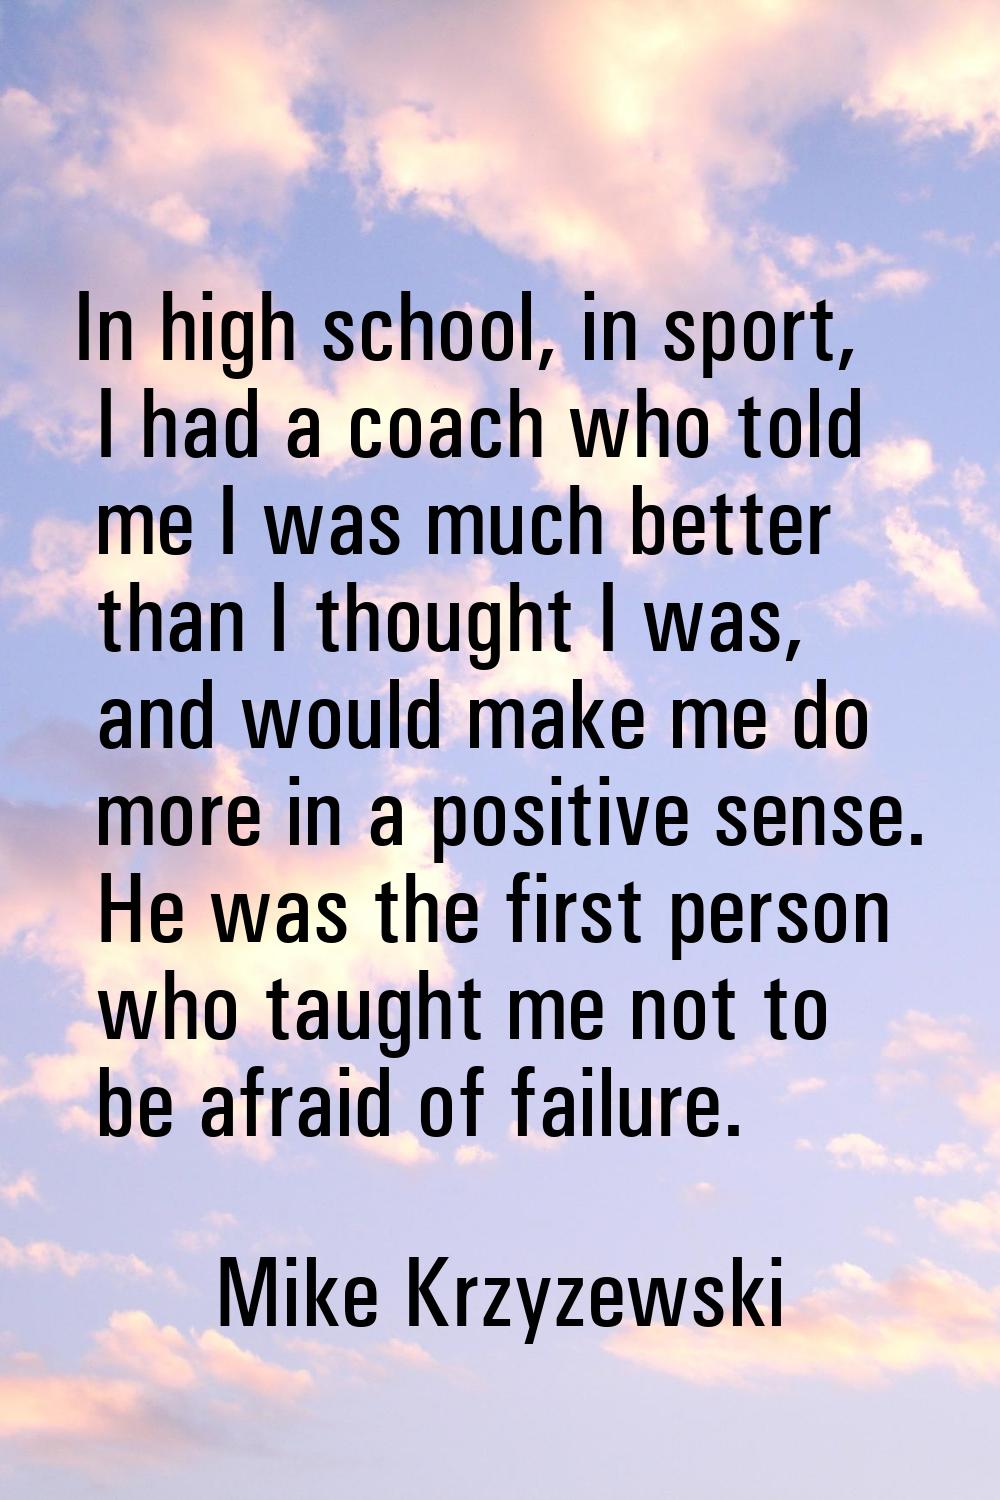 In high school, in sport, I had a coach who told me I was much better than I thought I was, and wou